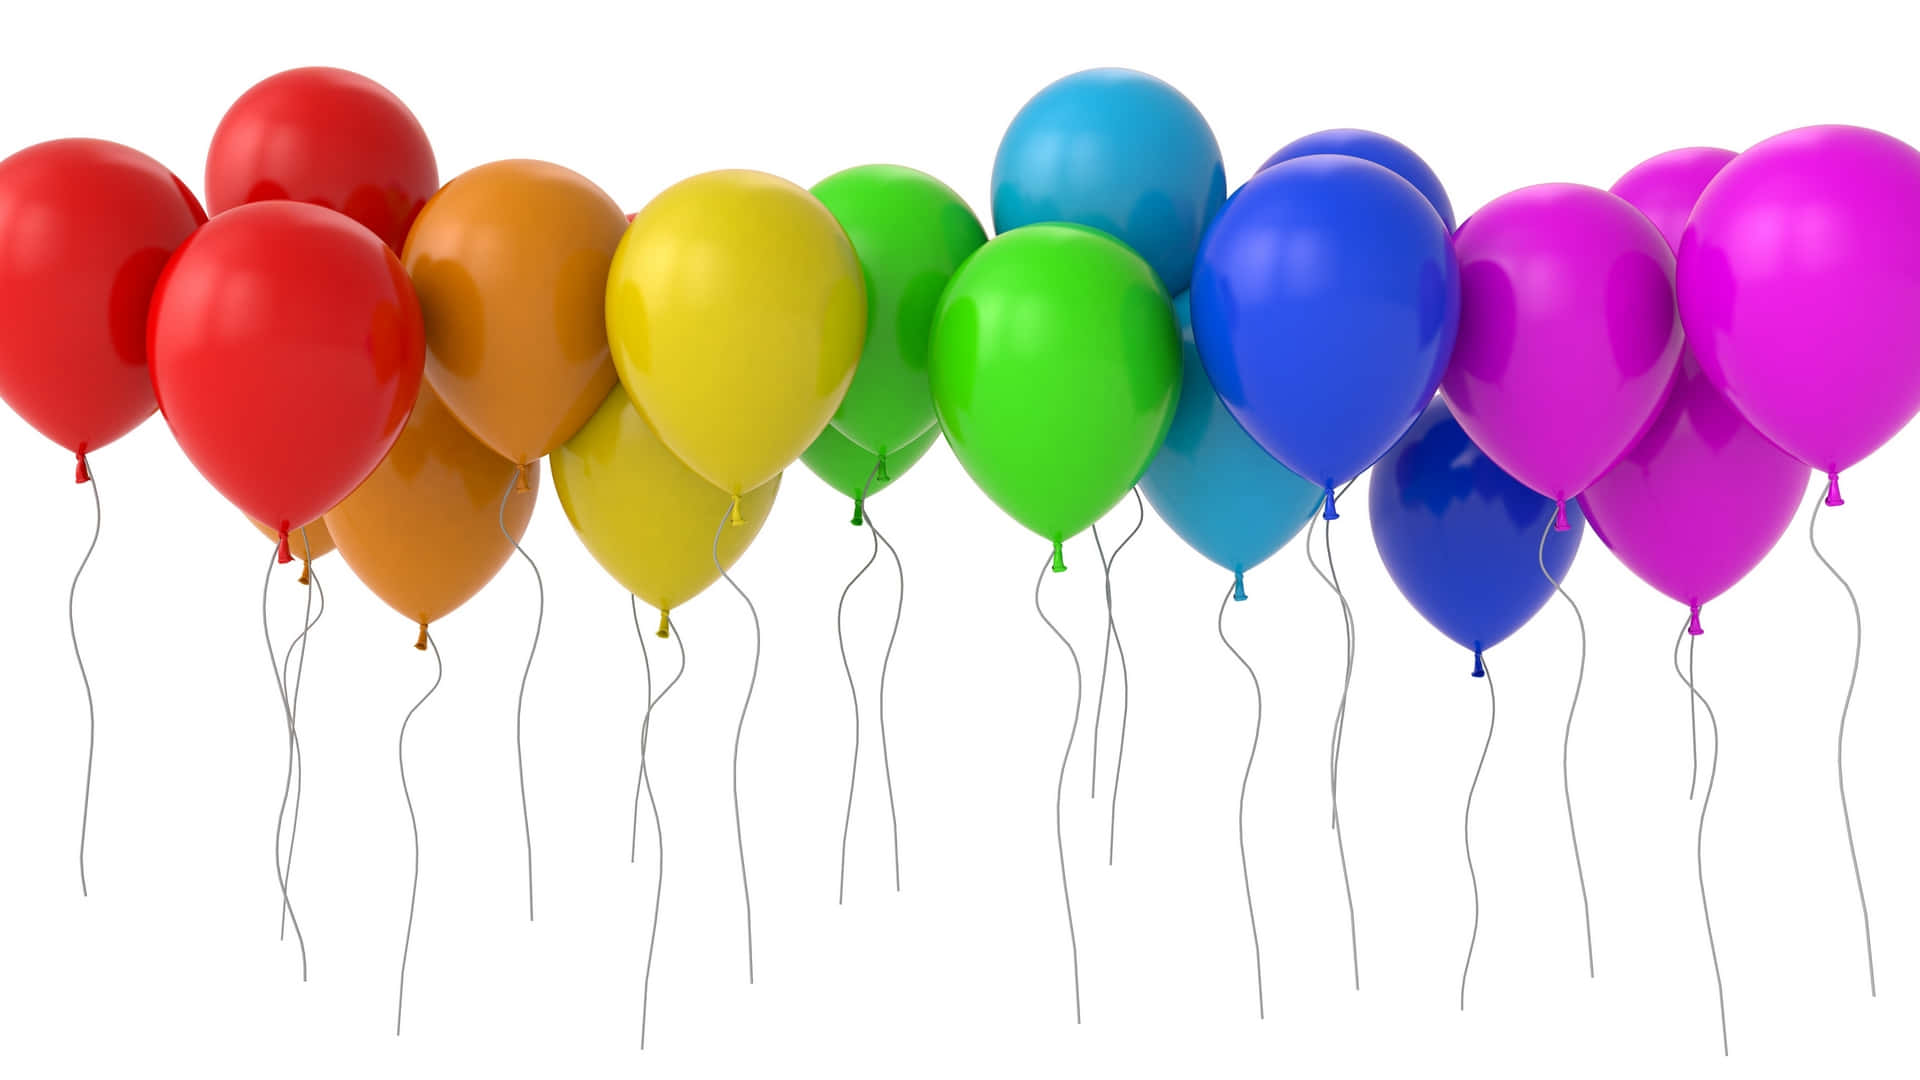 Shake your balloons, jump for joy - it's your special day!